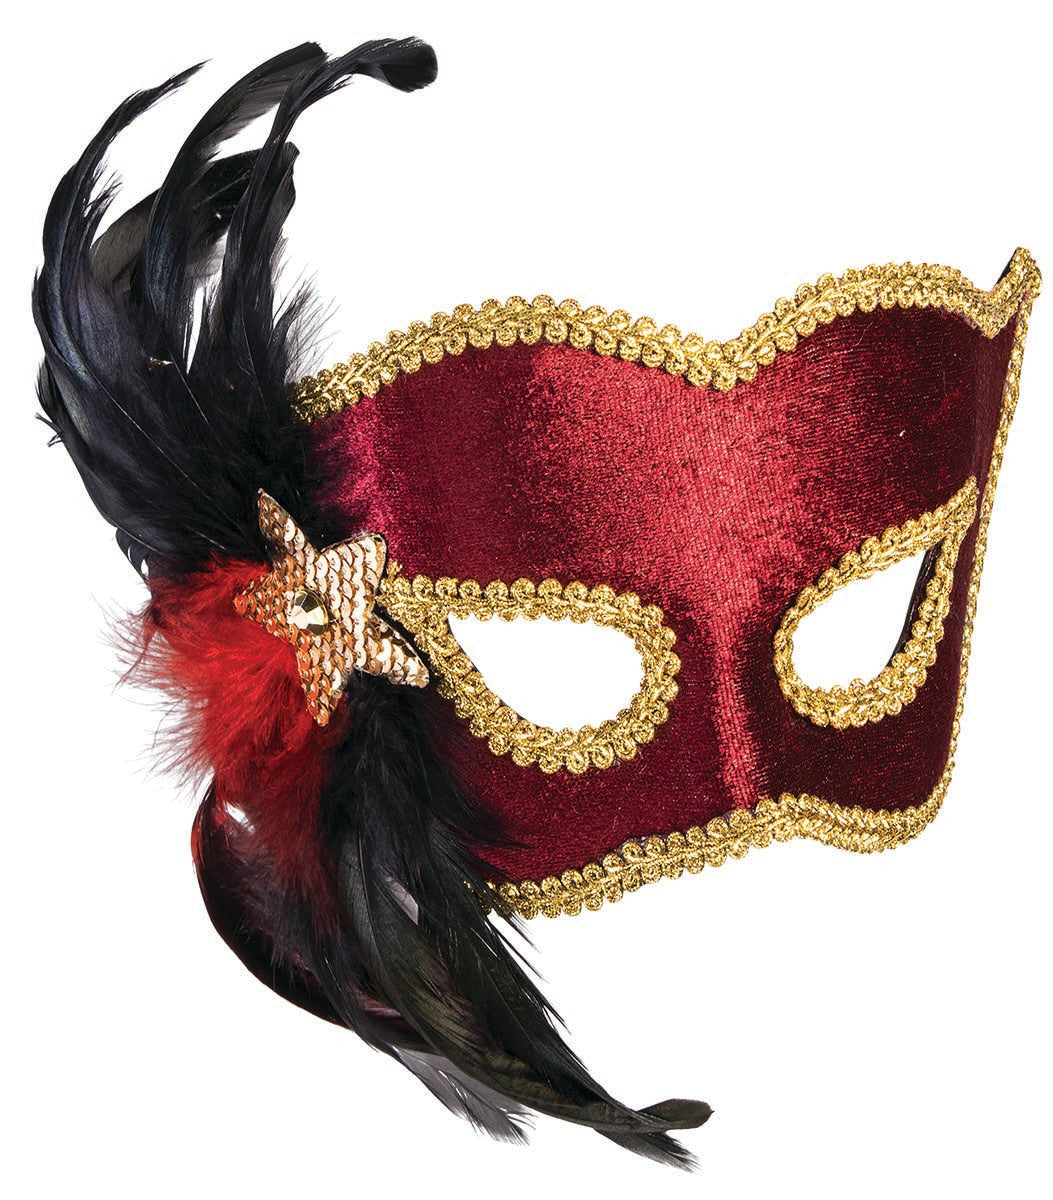 A maroon carnival half mask with black feathers on the side.